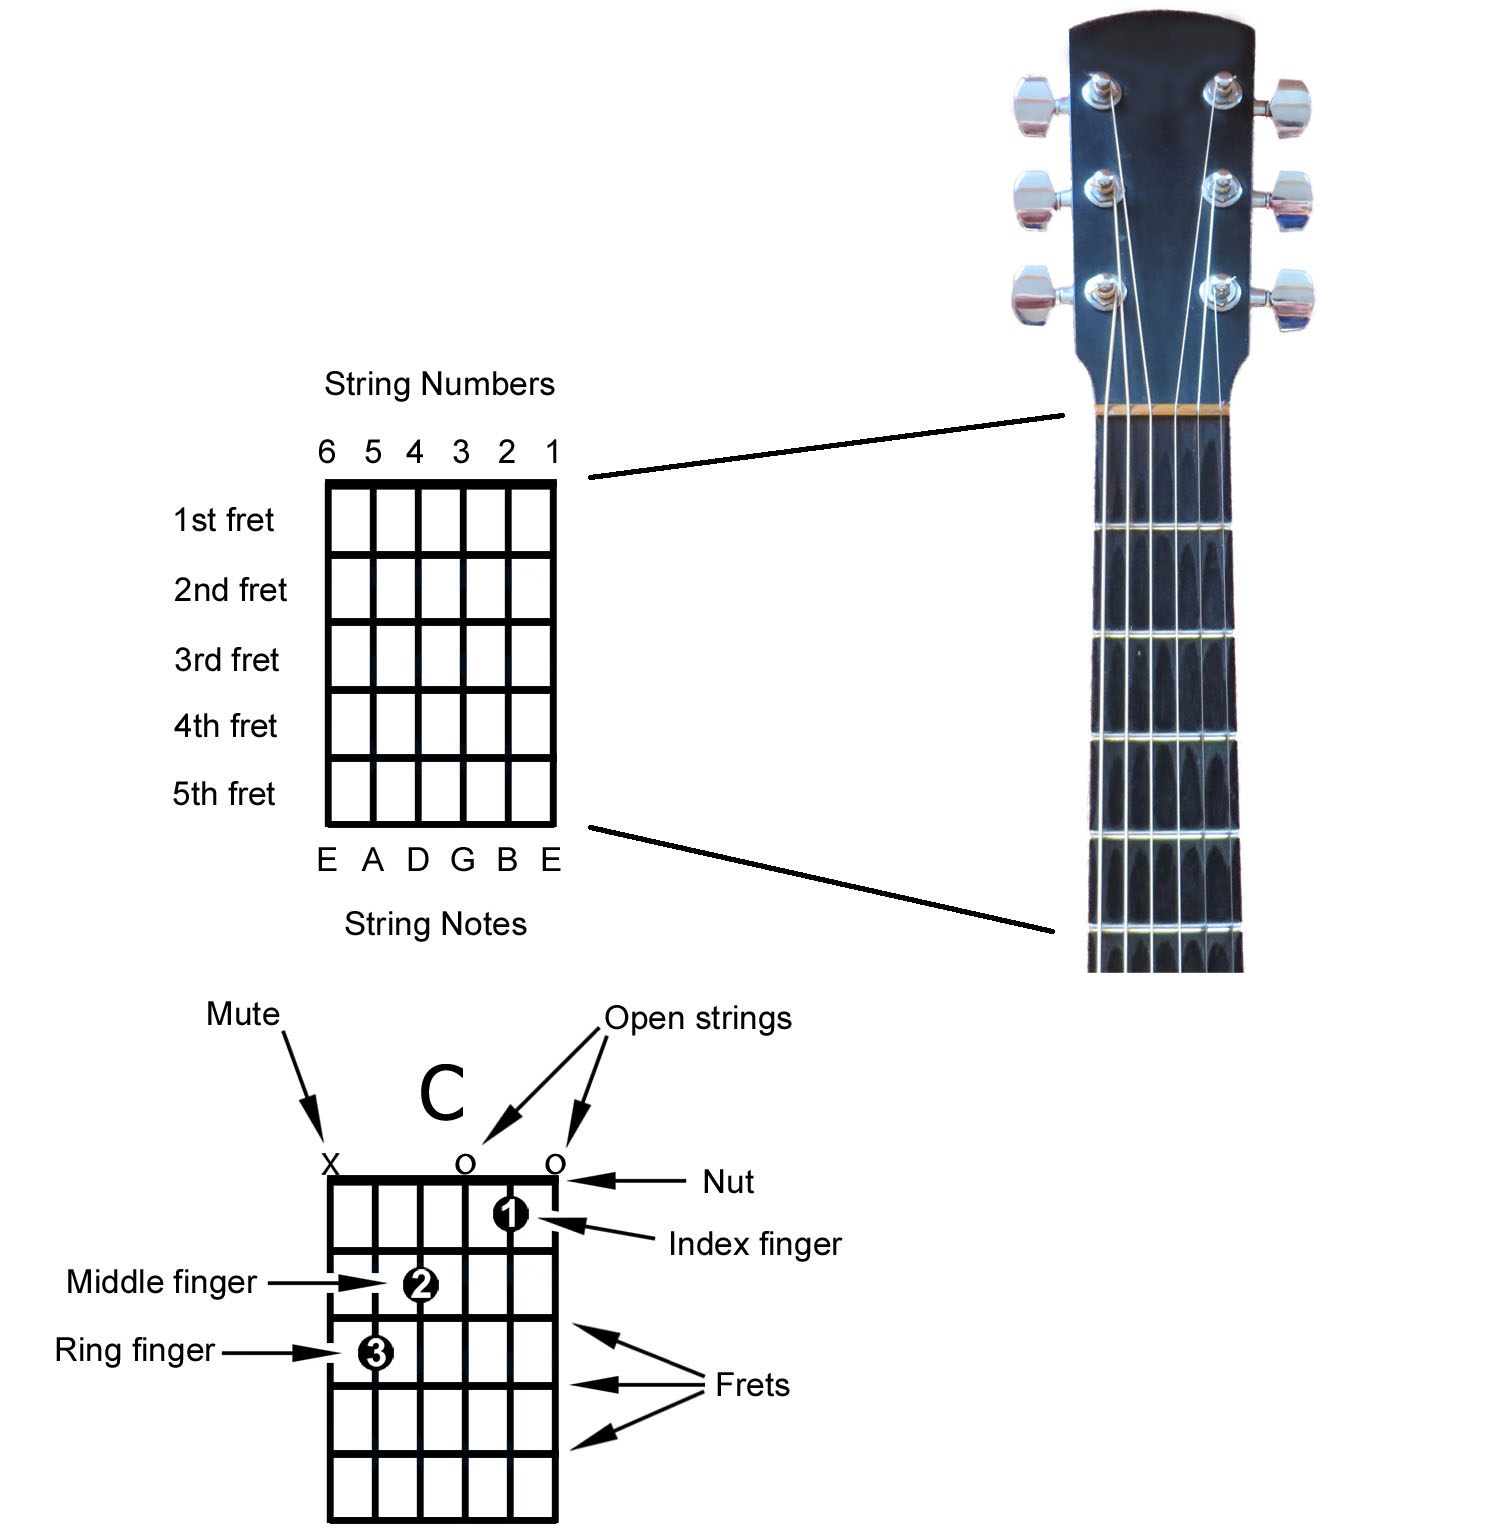 how to read guitar chords chart